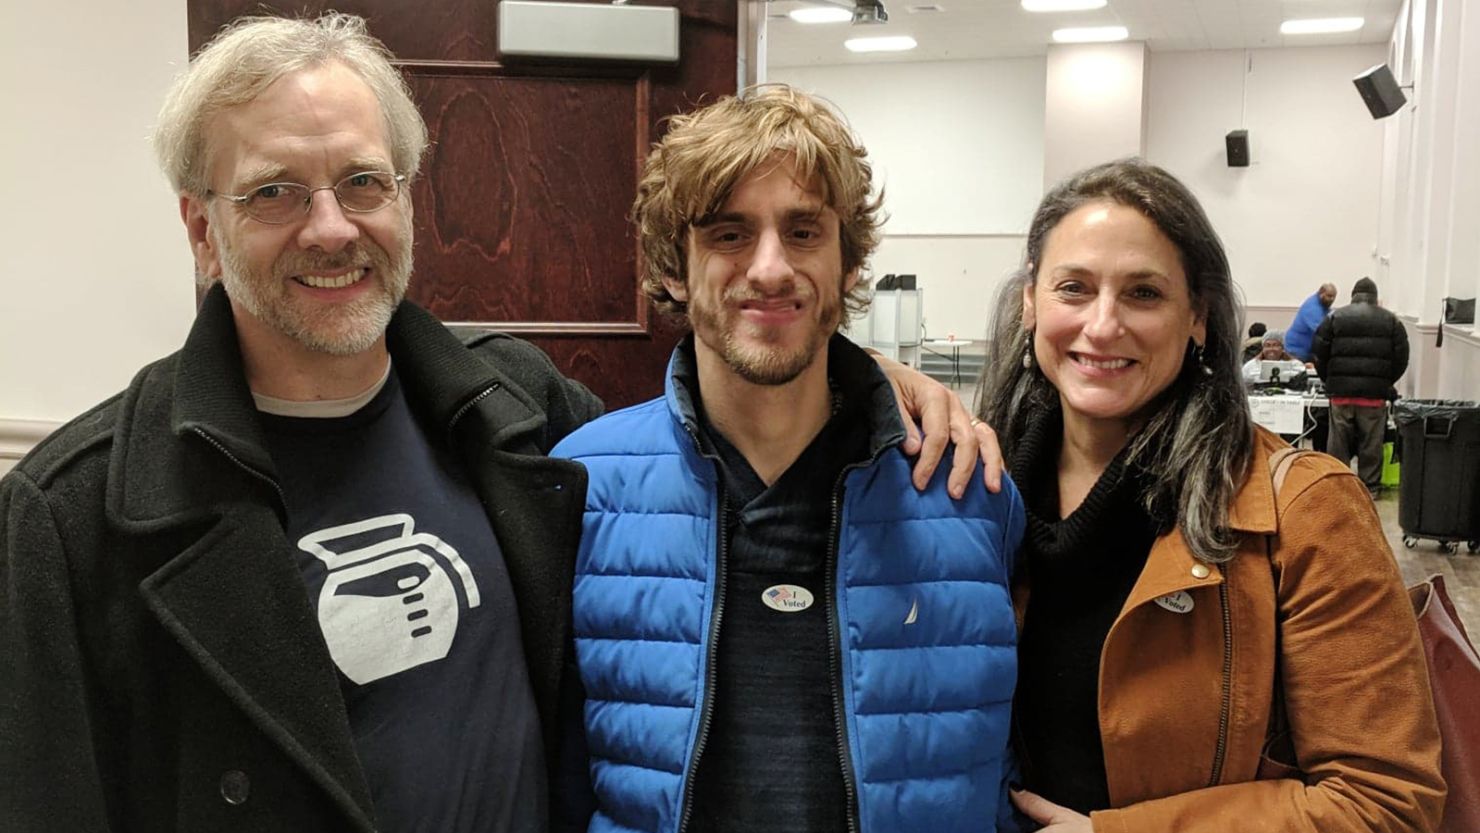 Nathaniel Batchelder proudly wears an "I Voted" sticker after casting an early ballot alongside father Ned Batchelder and mother Susan Senator.